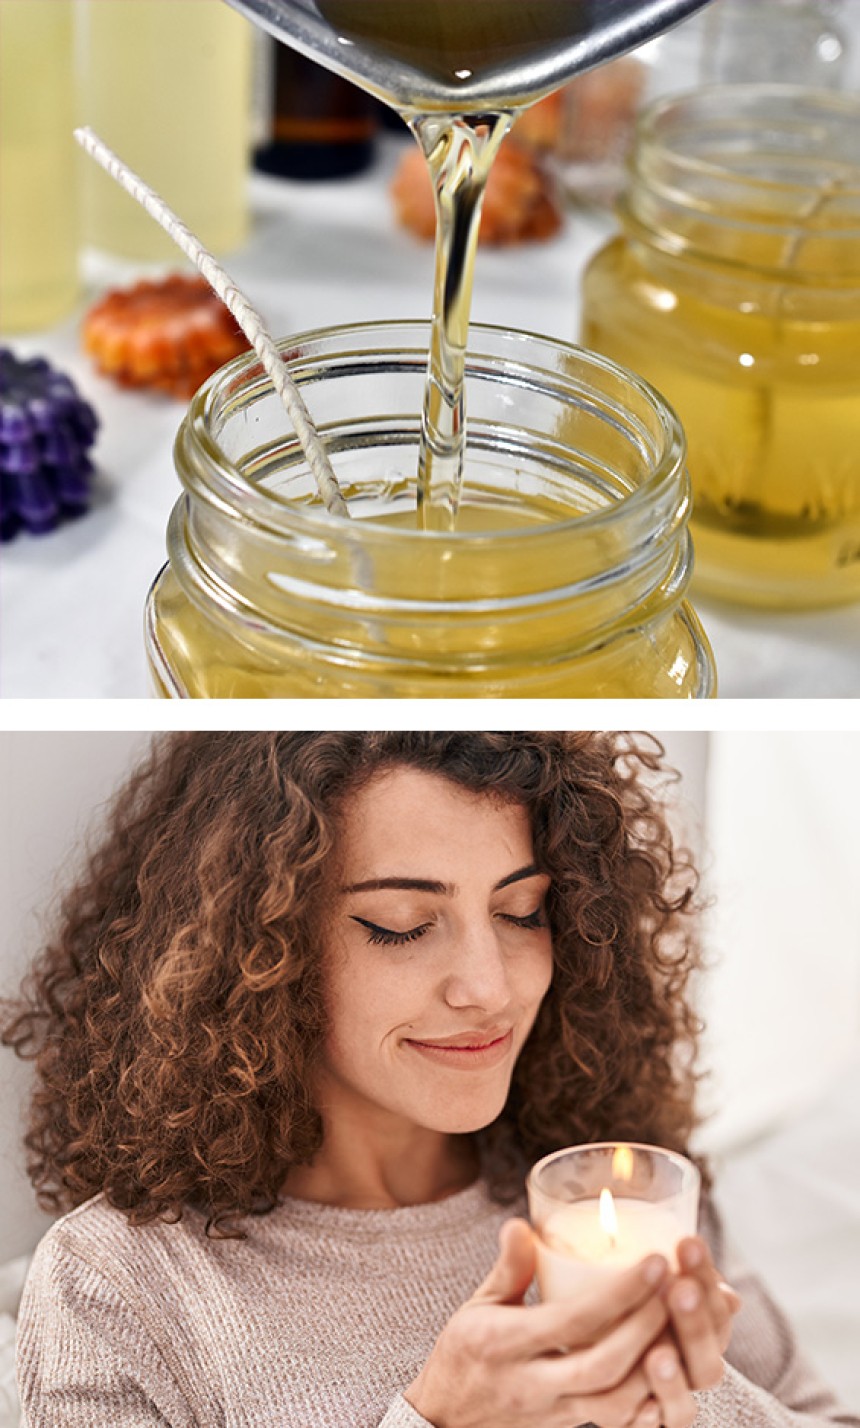 Image 1: Candle wax poured into jar. Image 2: Woman smelling a candle